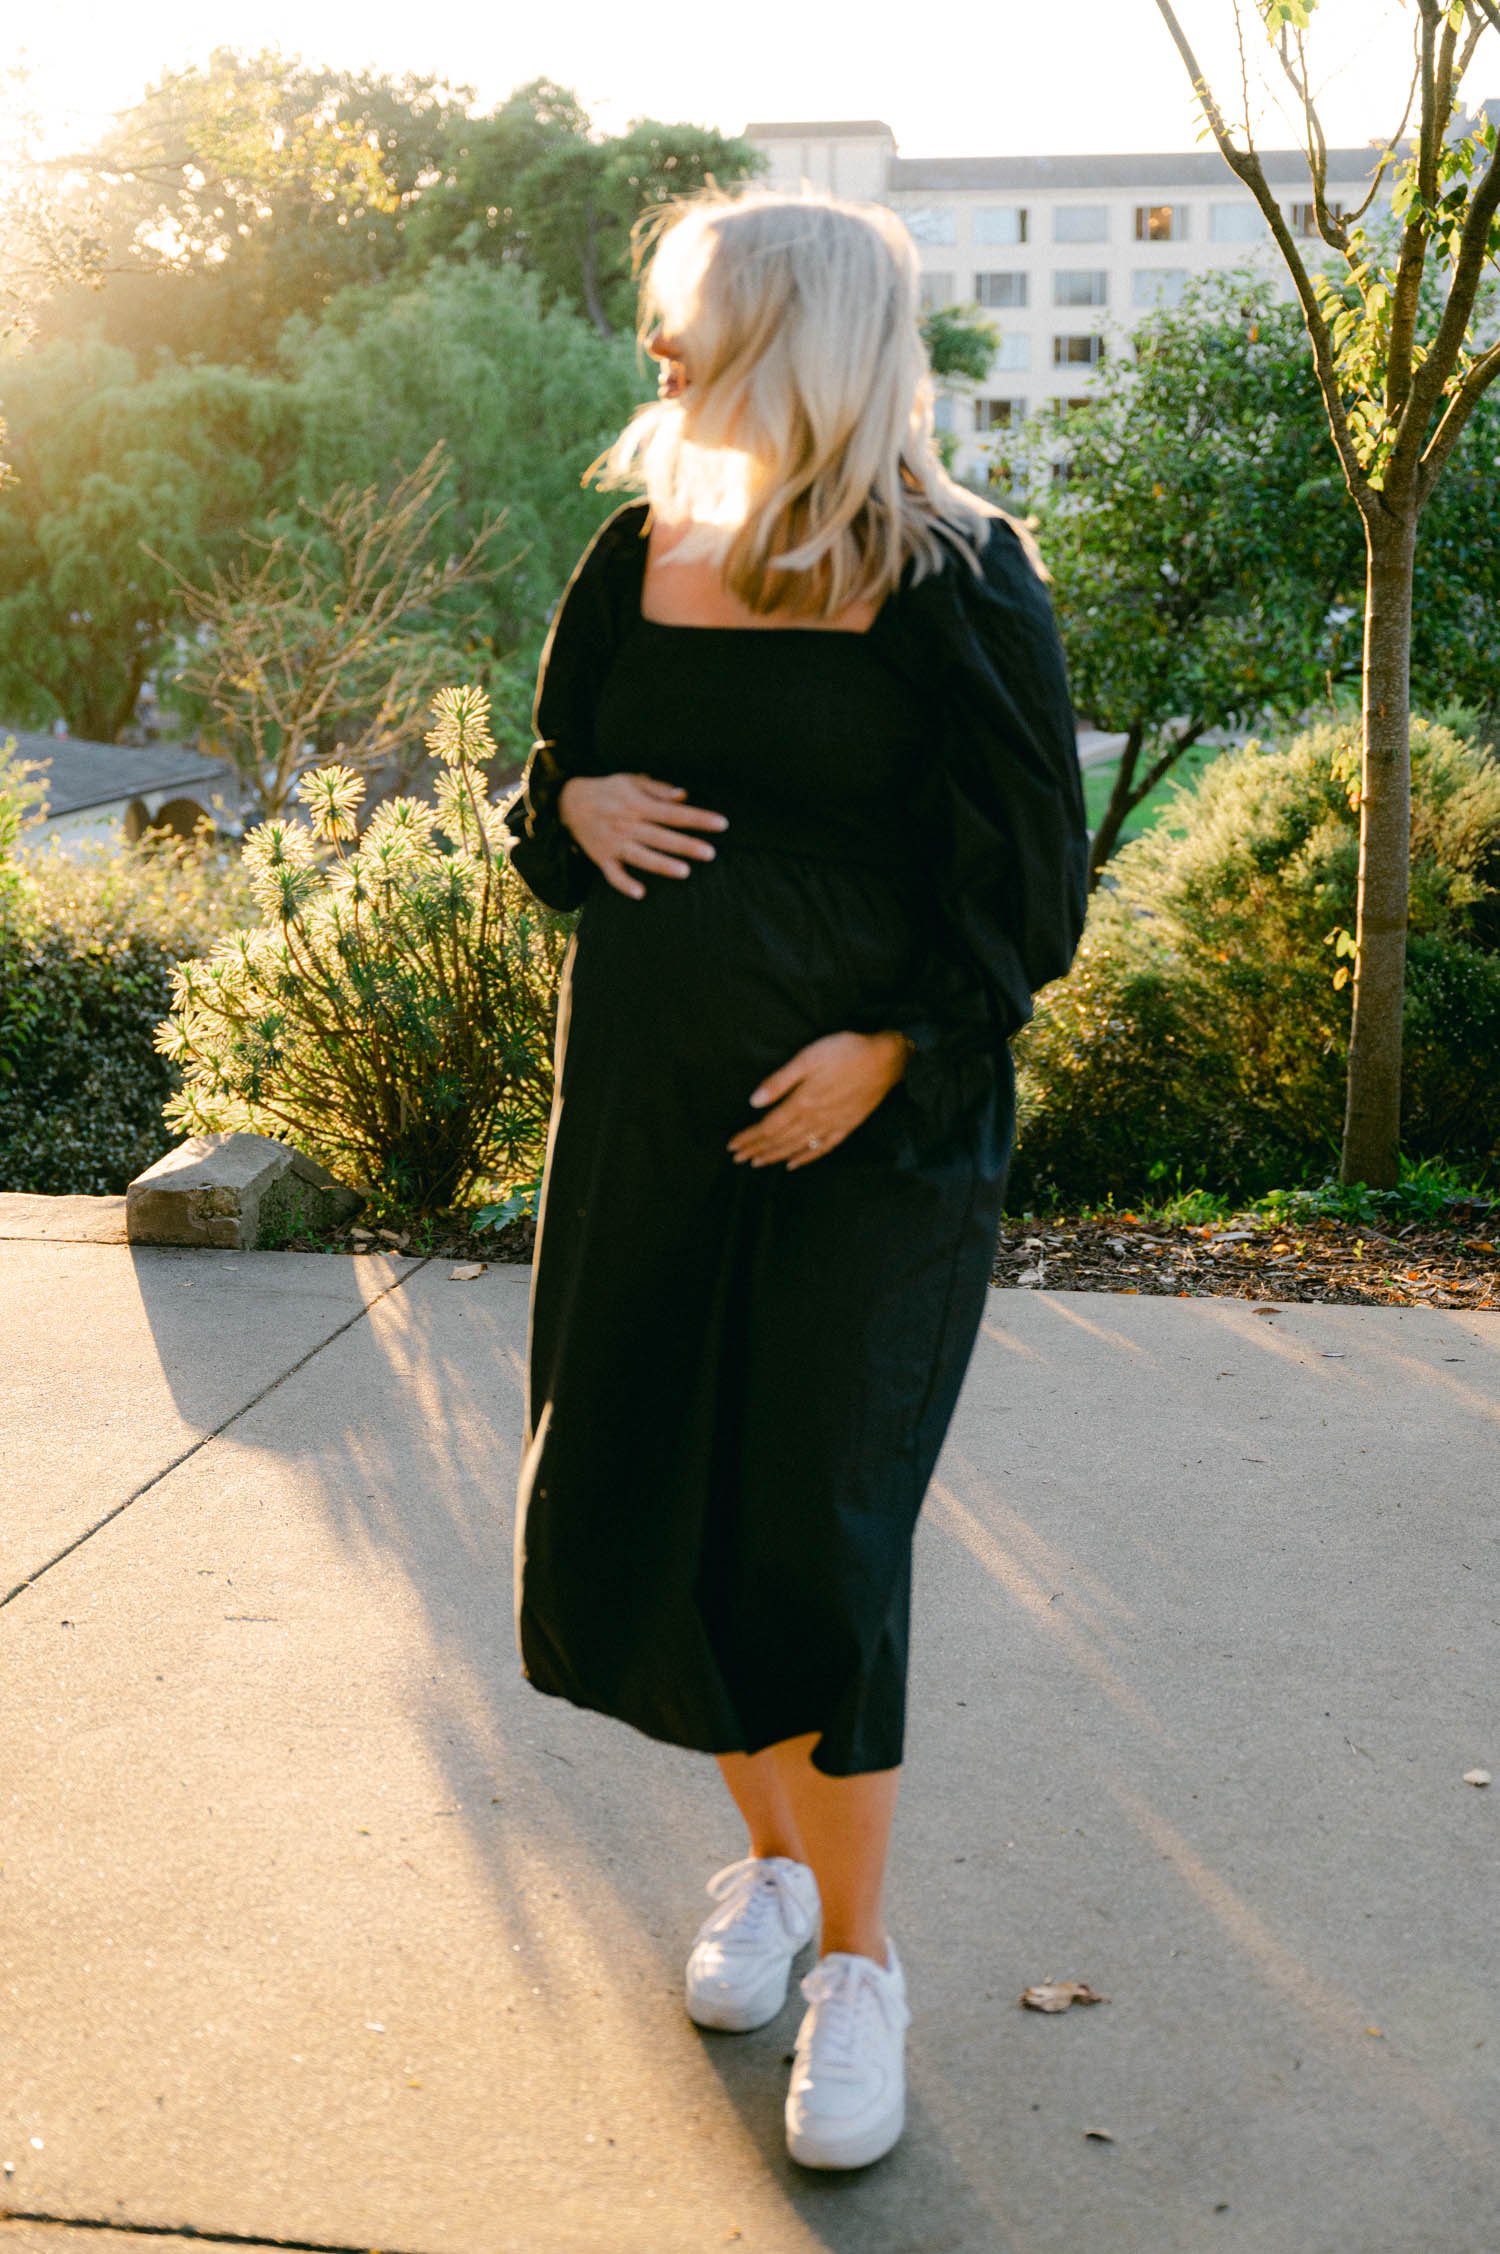 An urban san francisco maternity session, photo of mom-to-be during golden hour